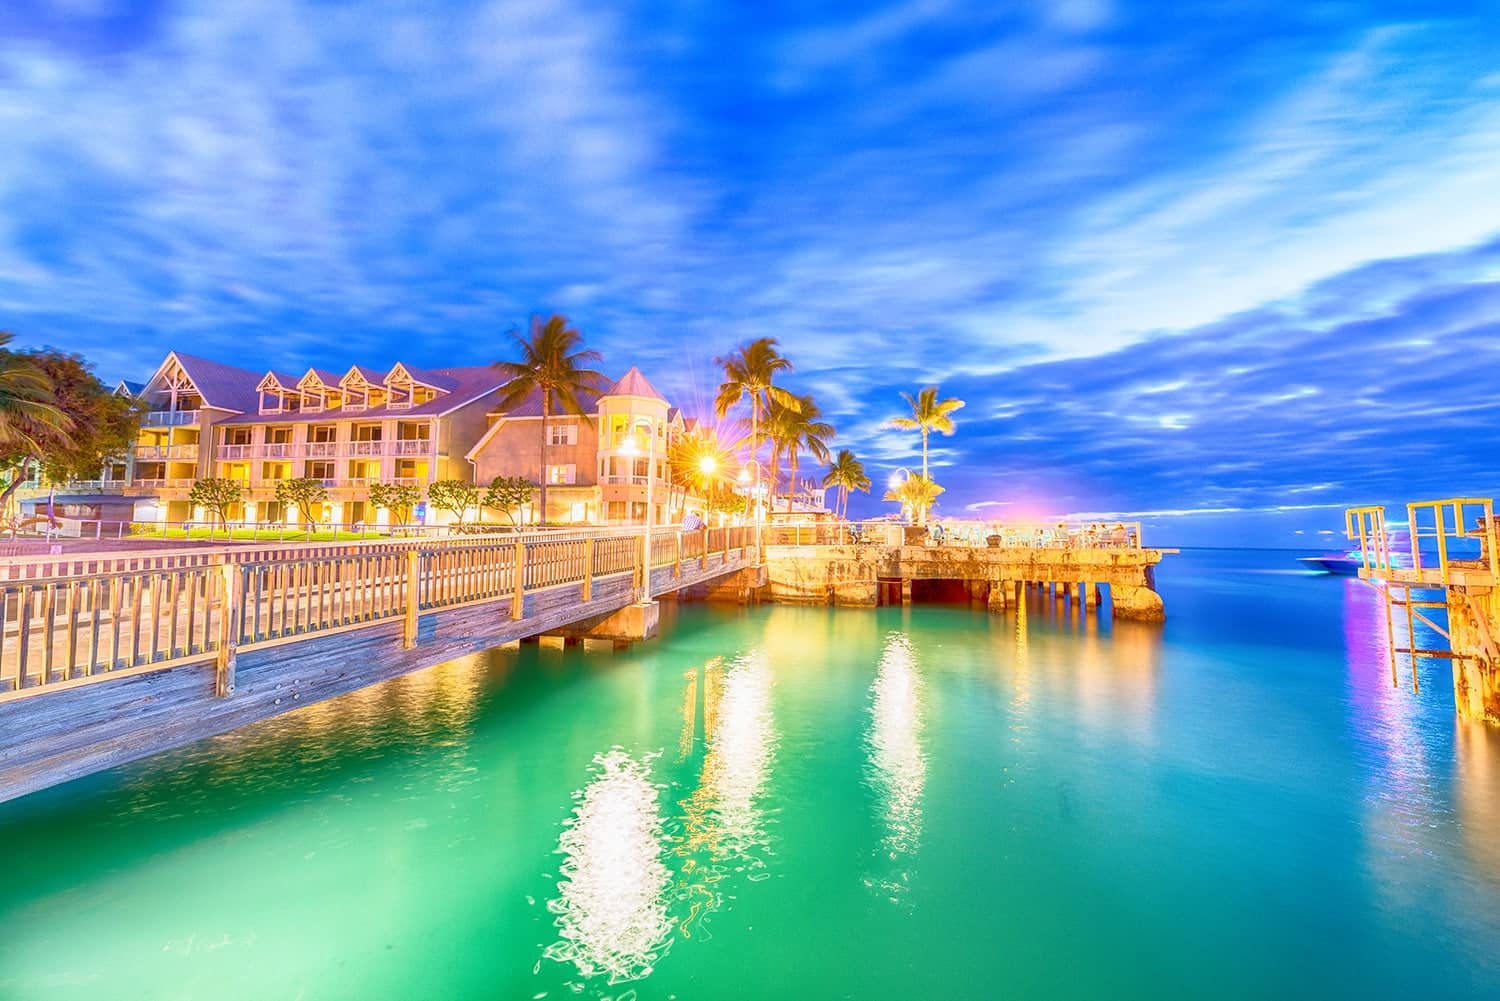 Key West, Florida – Photo by GagliardiPhotography/Shutterstock